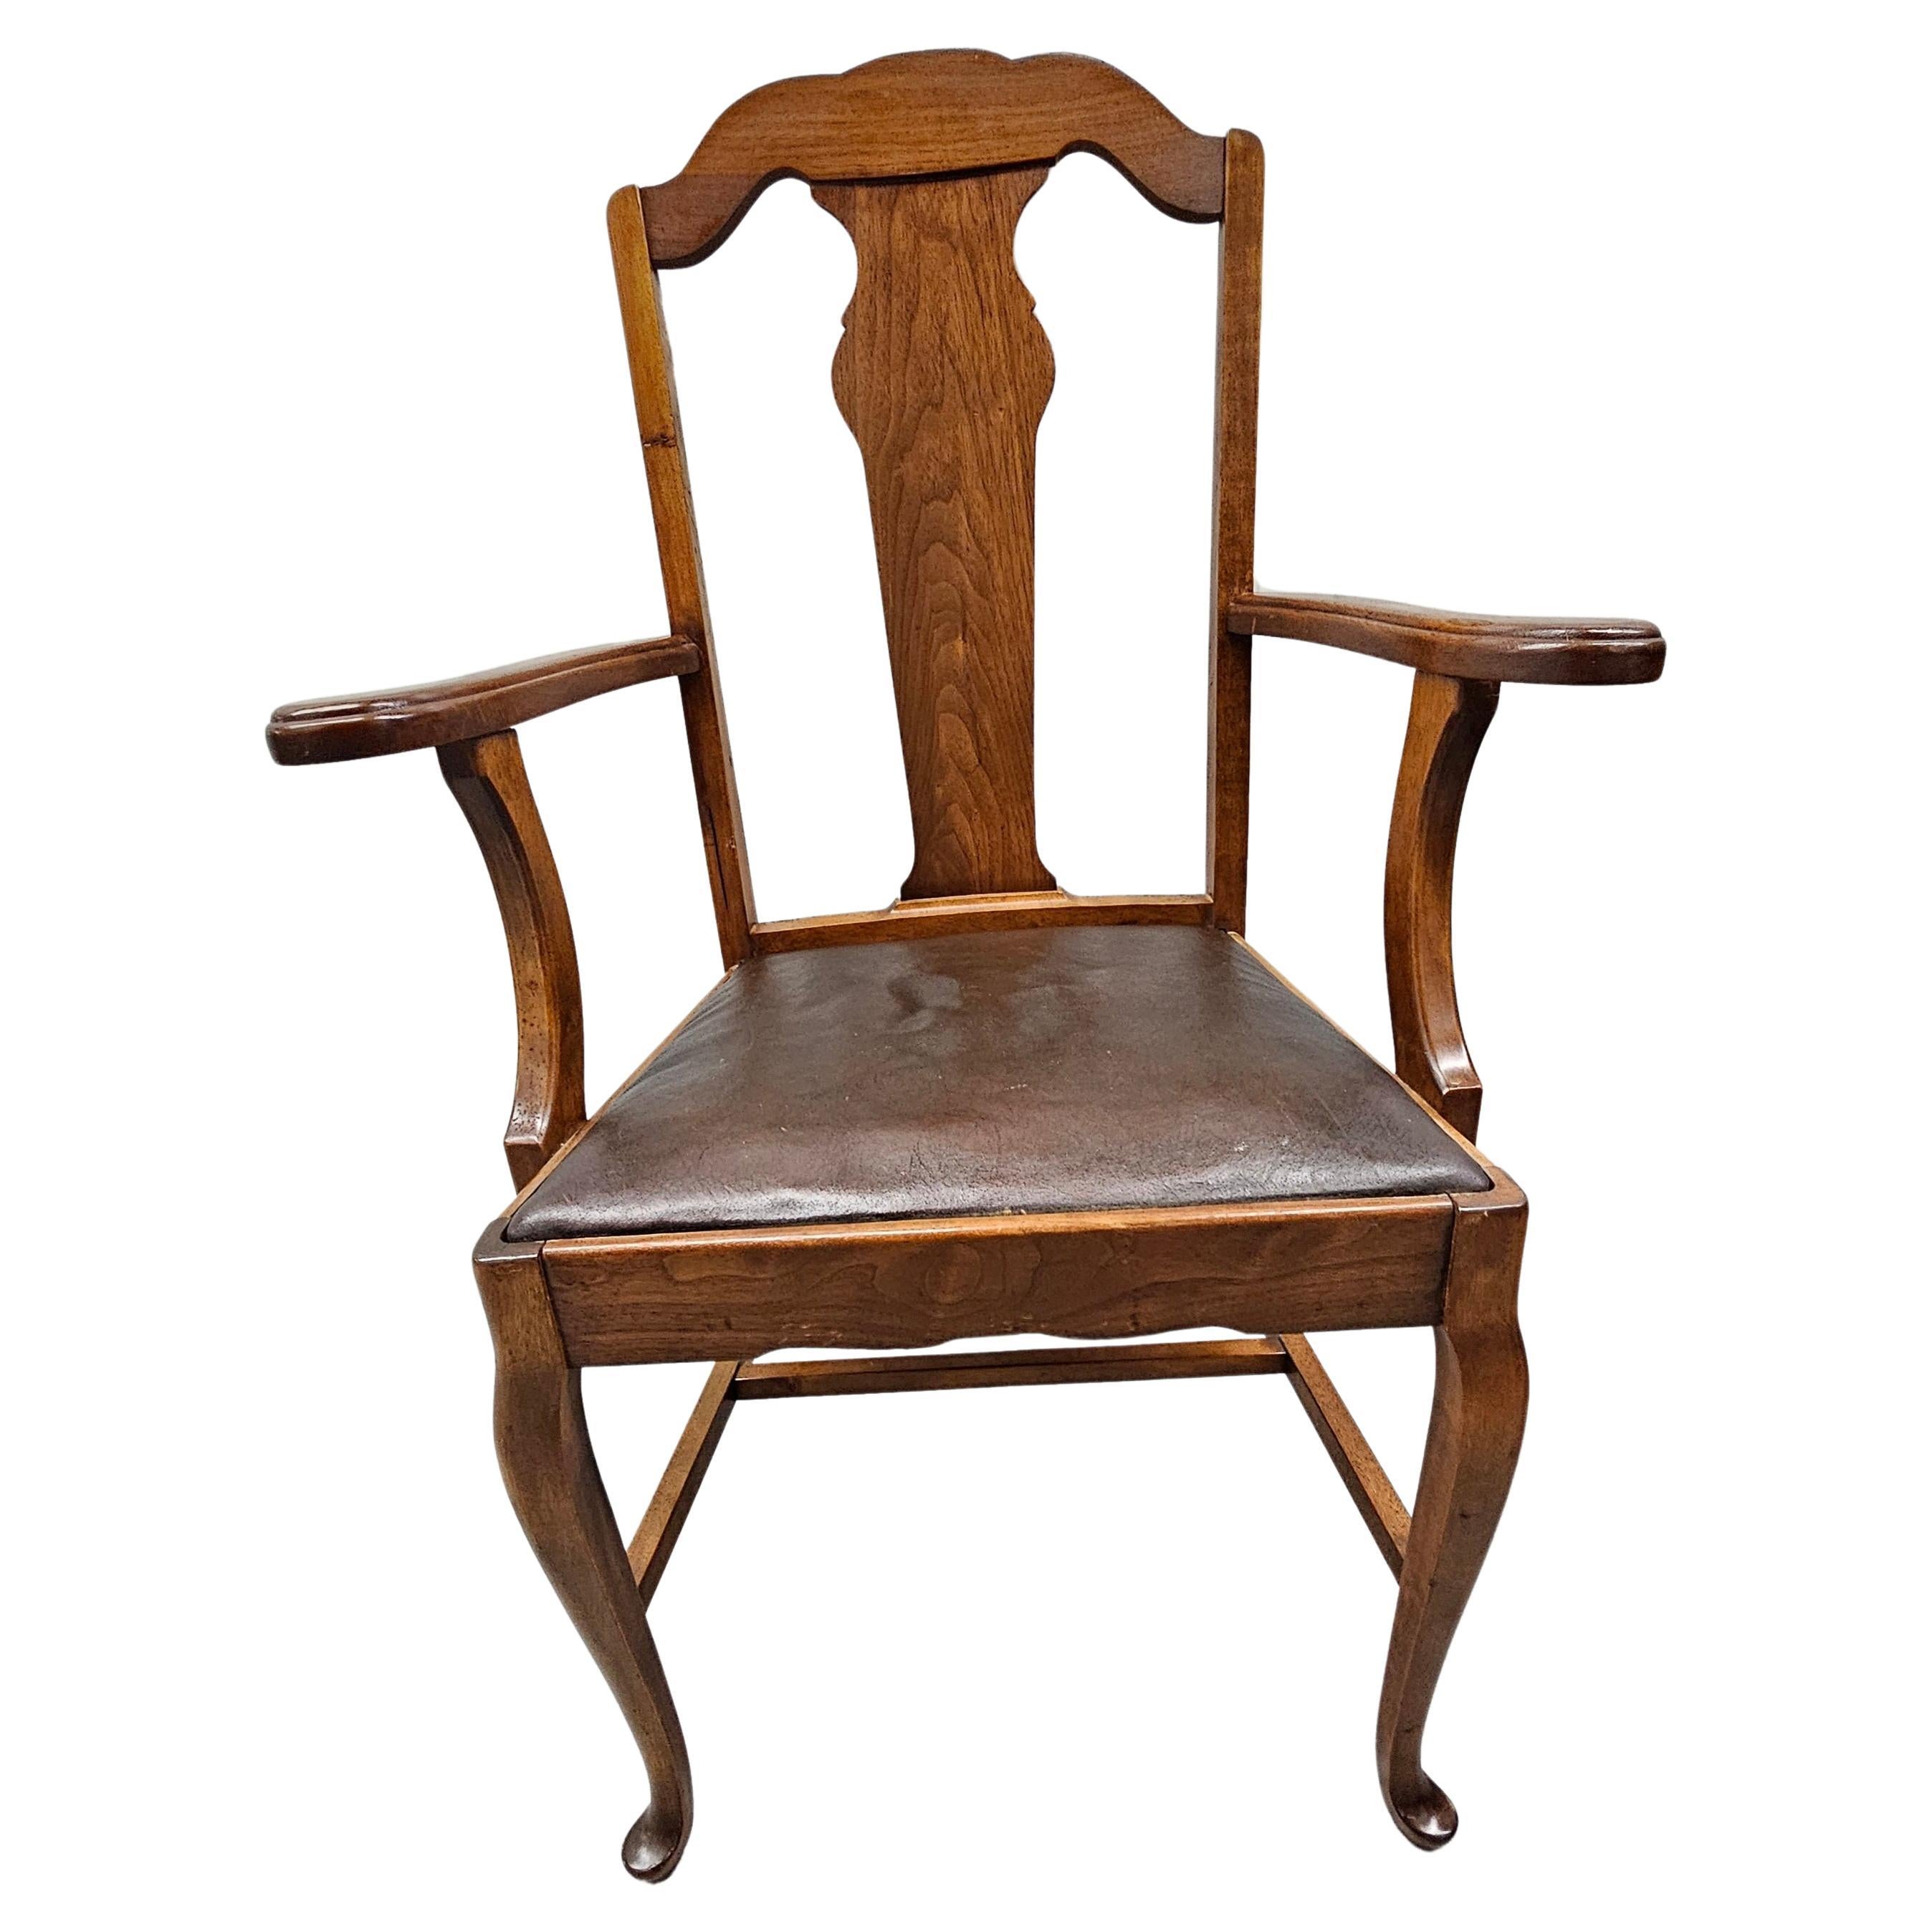 1916 Sikes Furniture Walnut & Leather Upholstered Seat Armchair In Good Condition For Sale In Germantown, MD